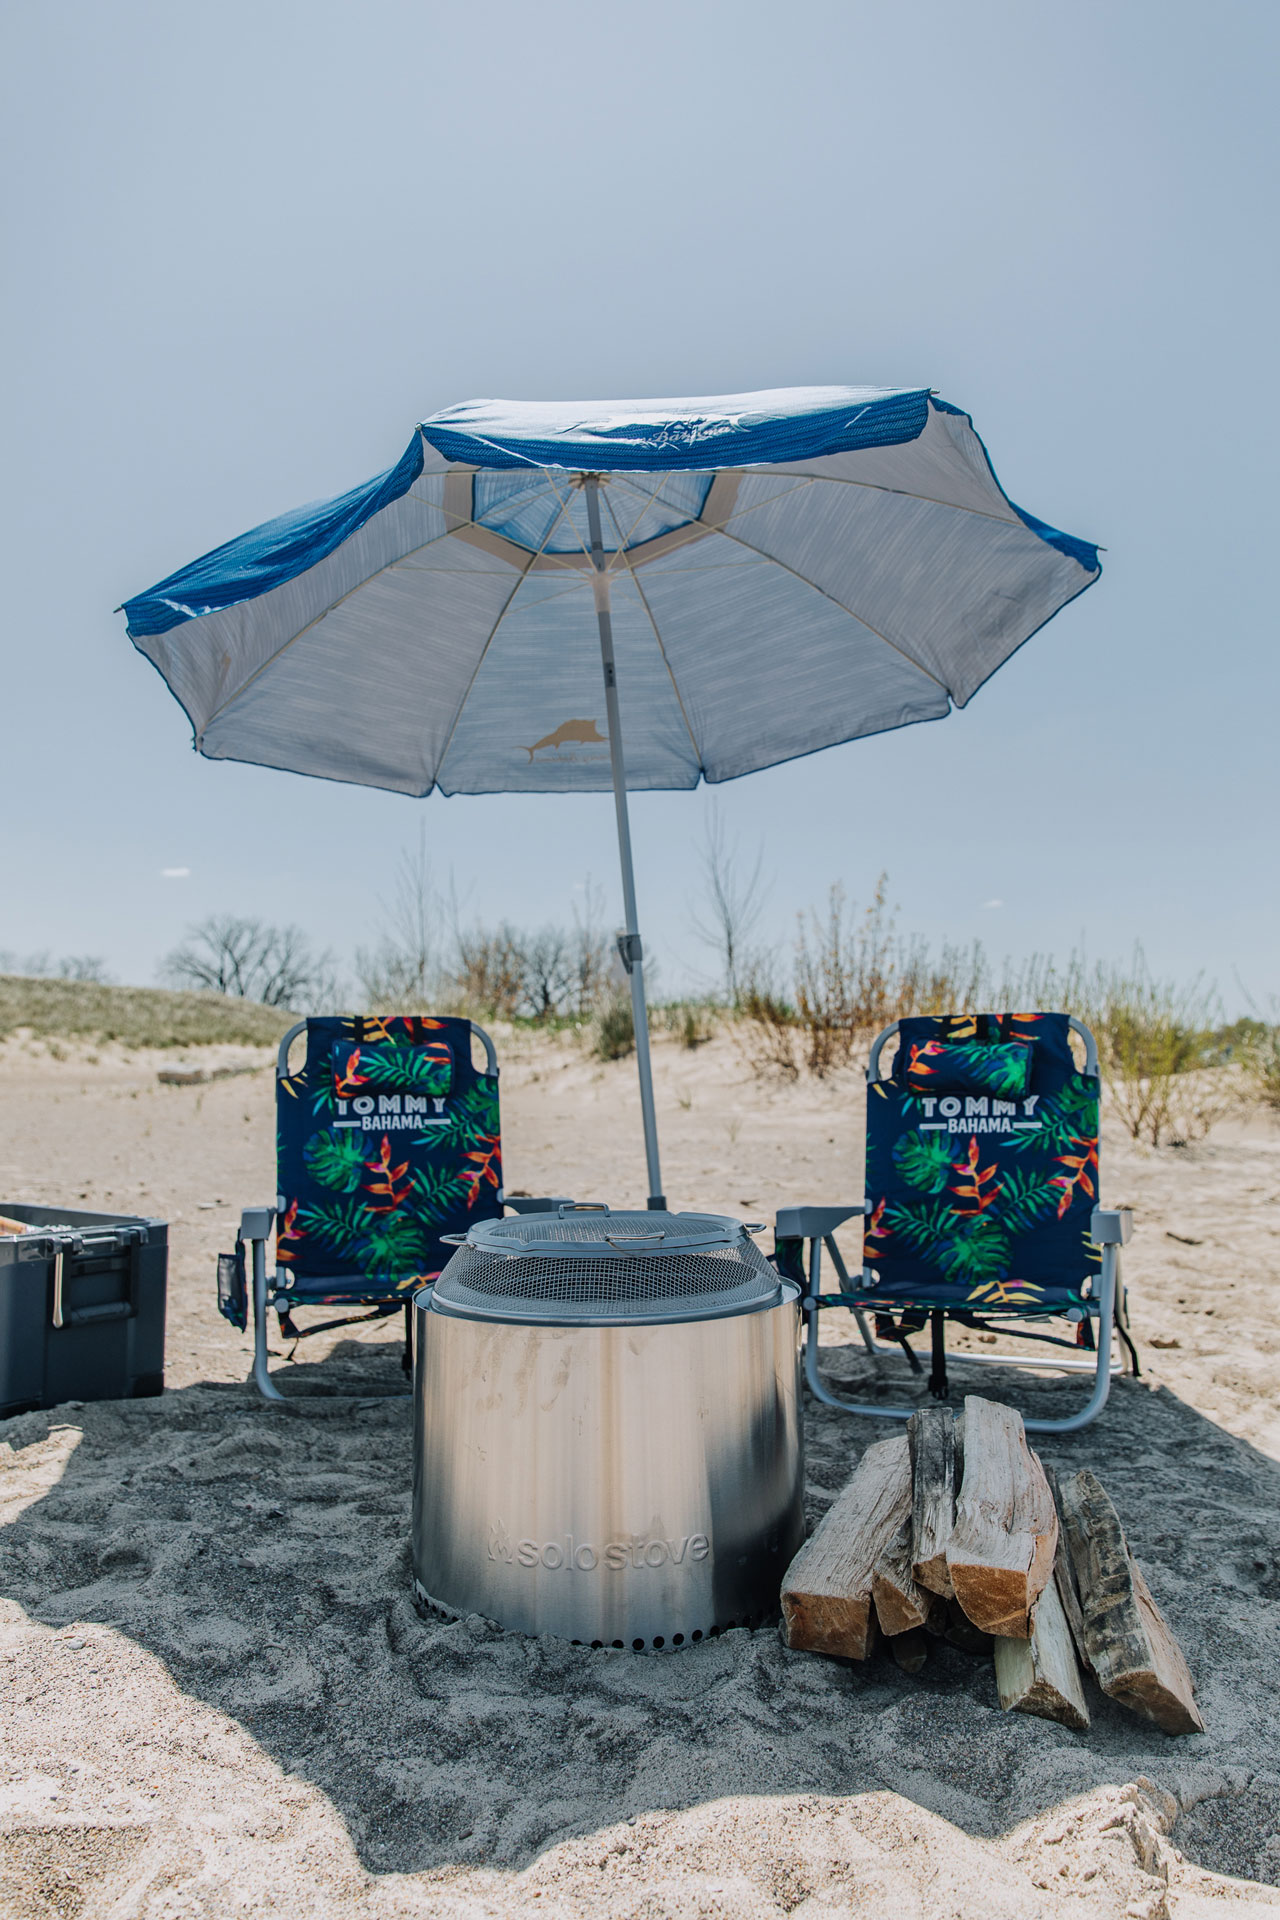 Tommy Bahama beach gear and solo stove